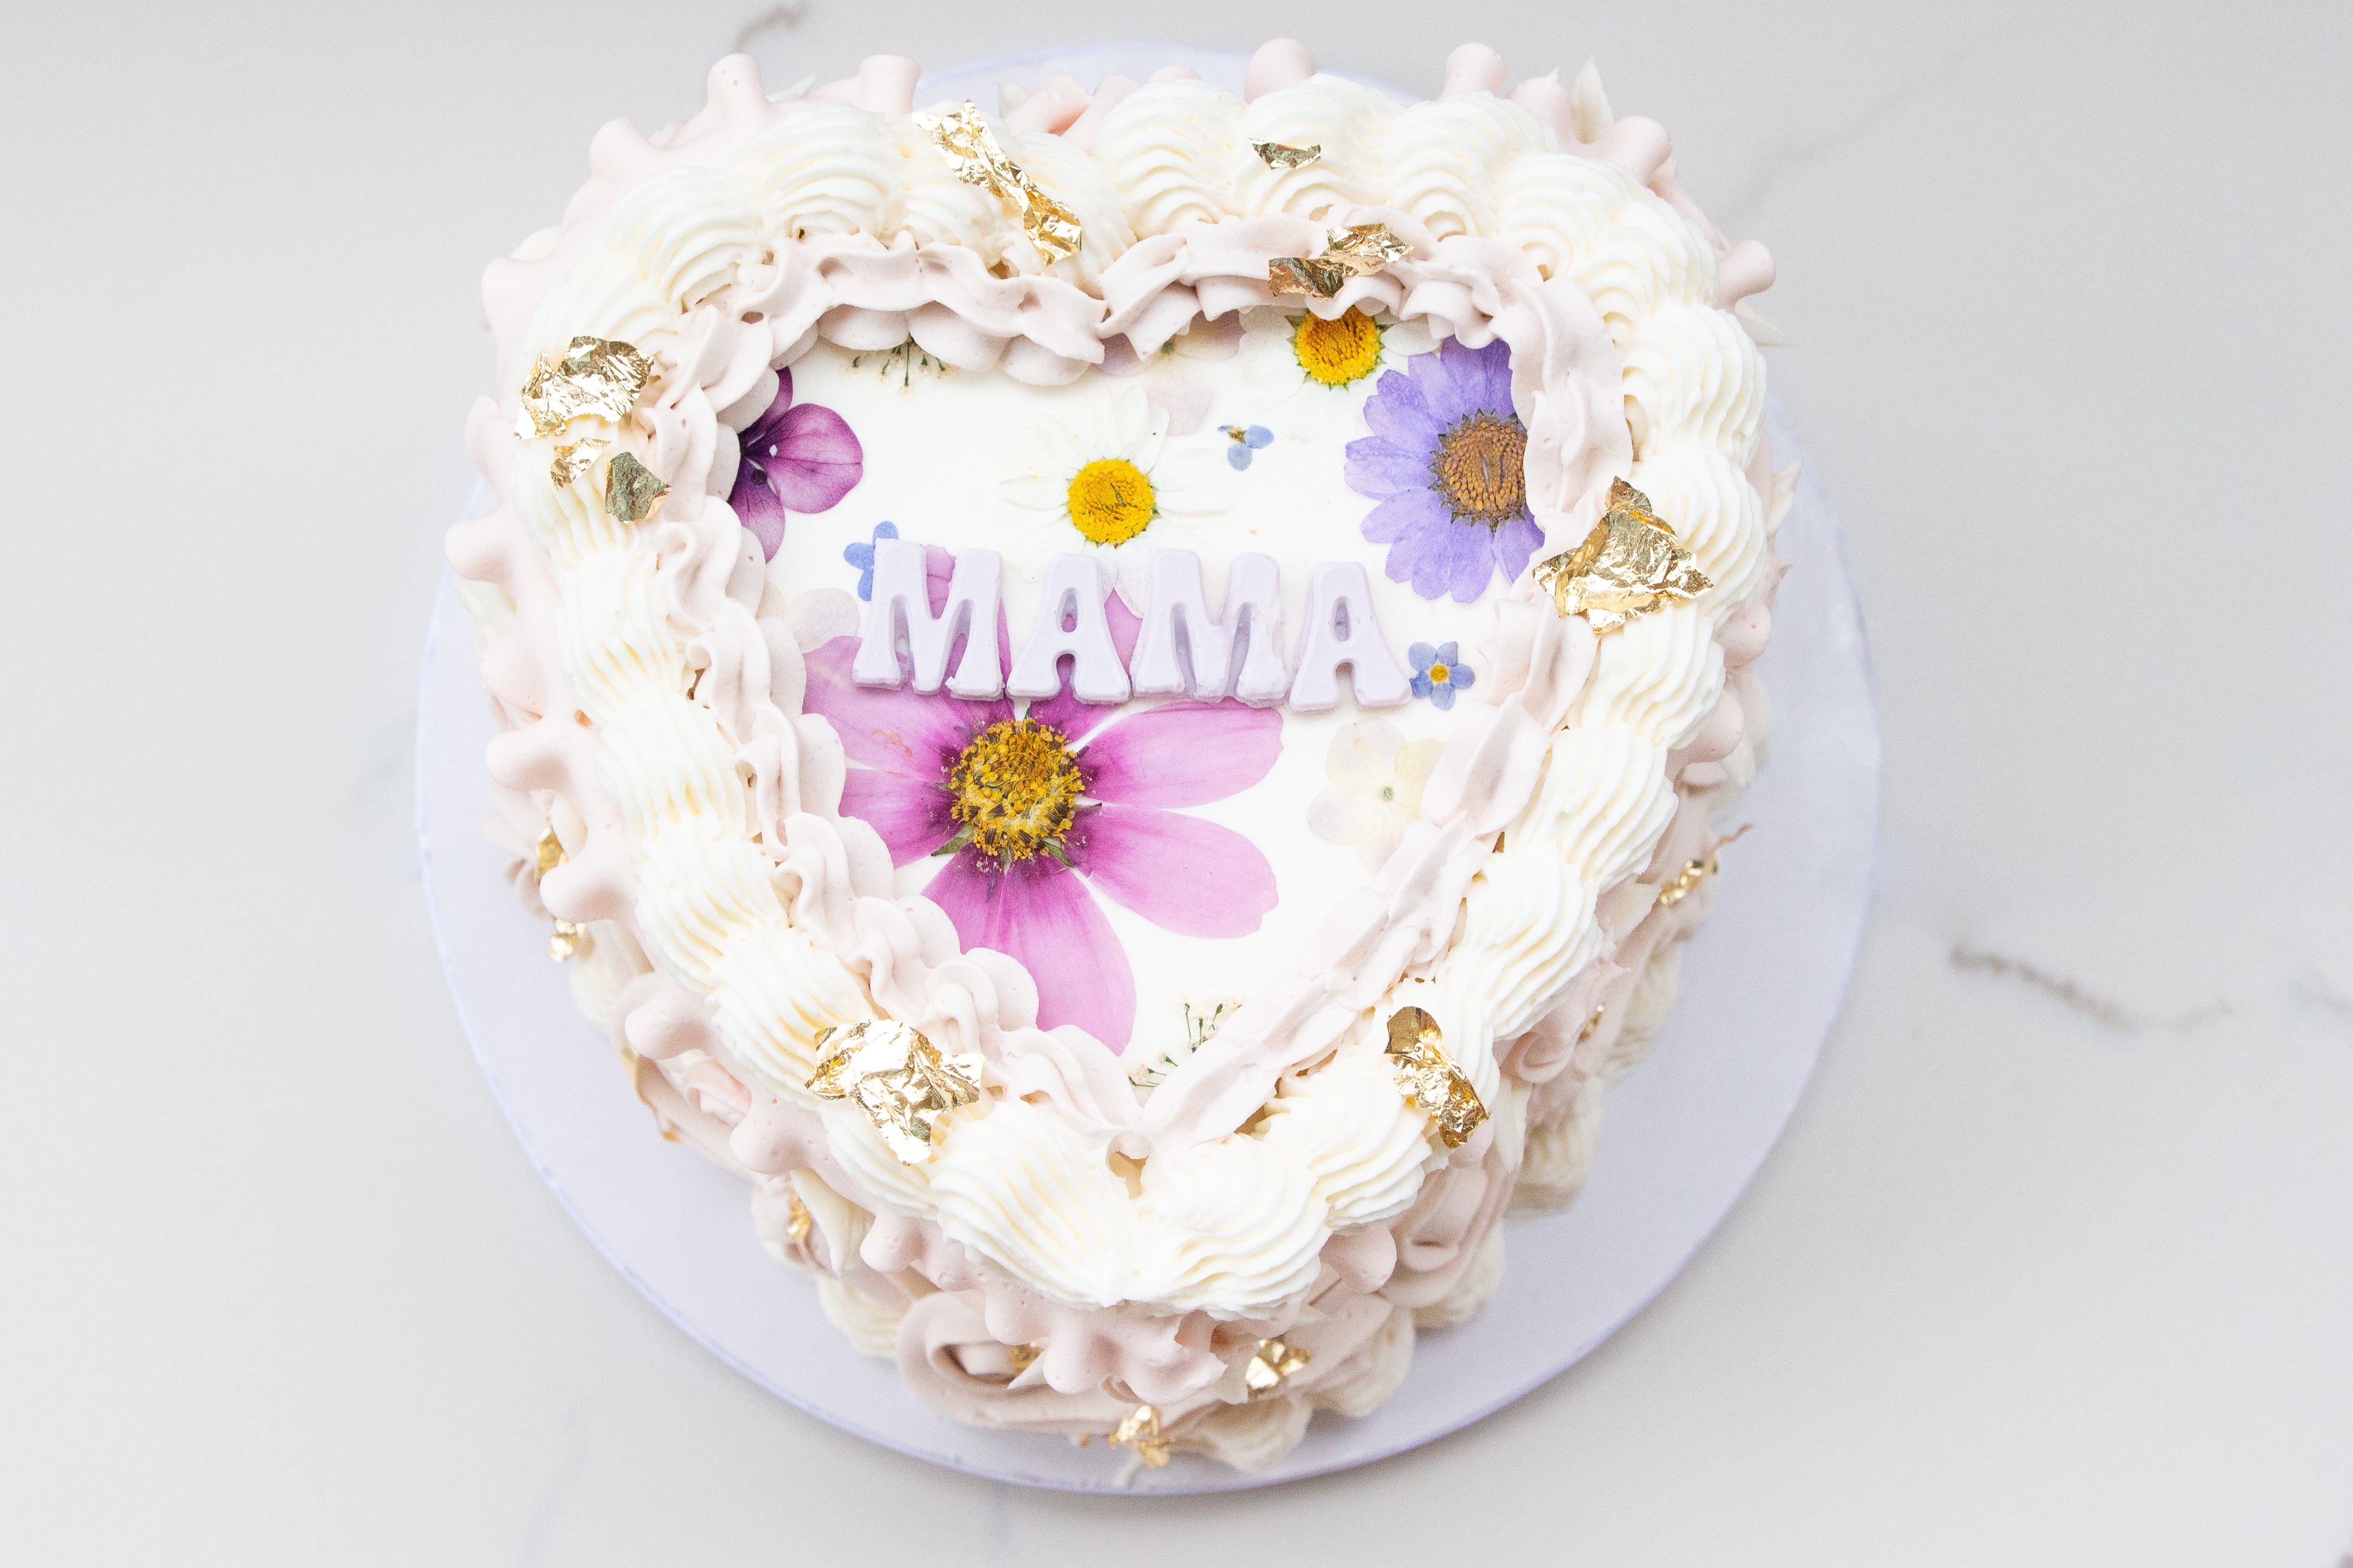 Cake toppers NZ - Happy 64th Birthday mama 🥳 cake topper | Facebook